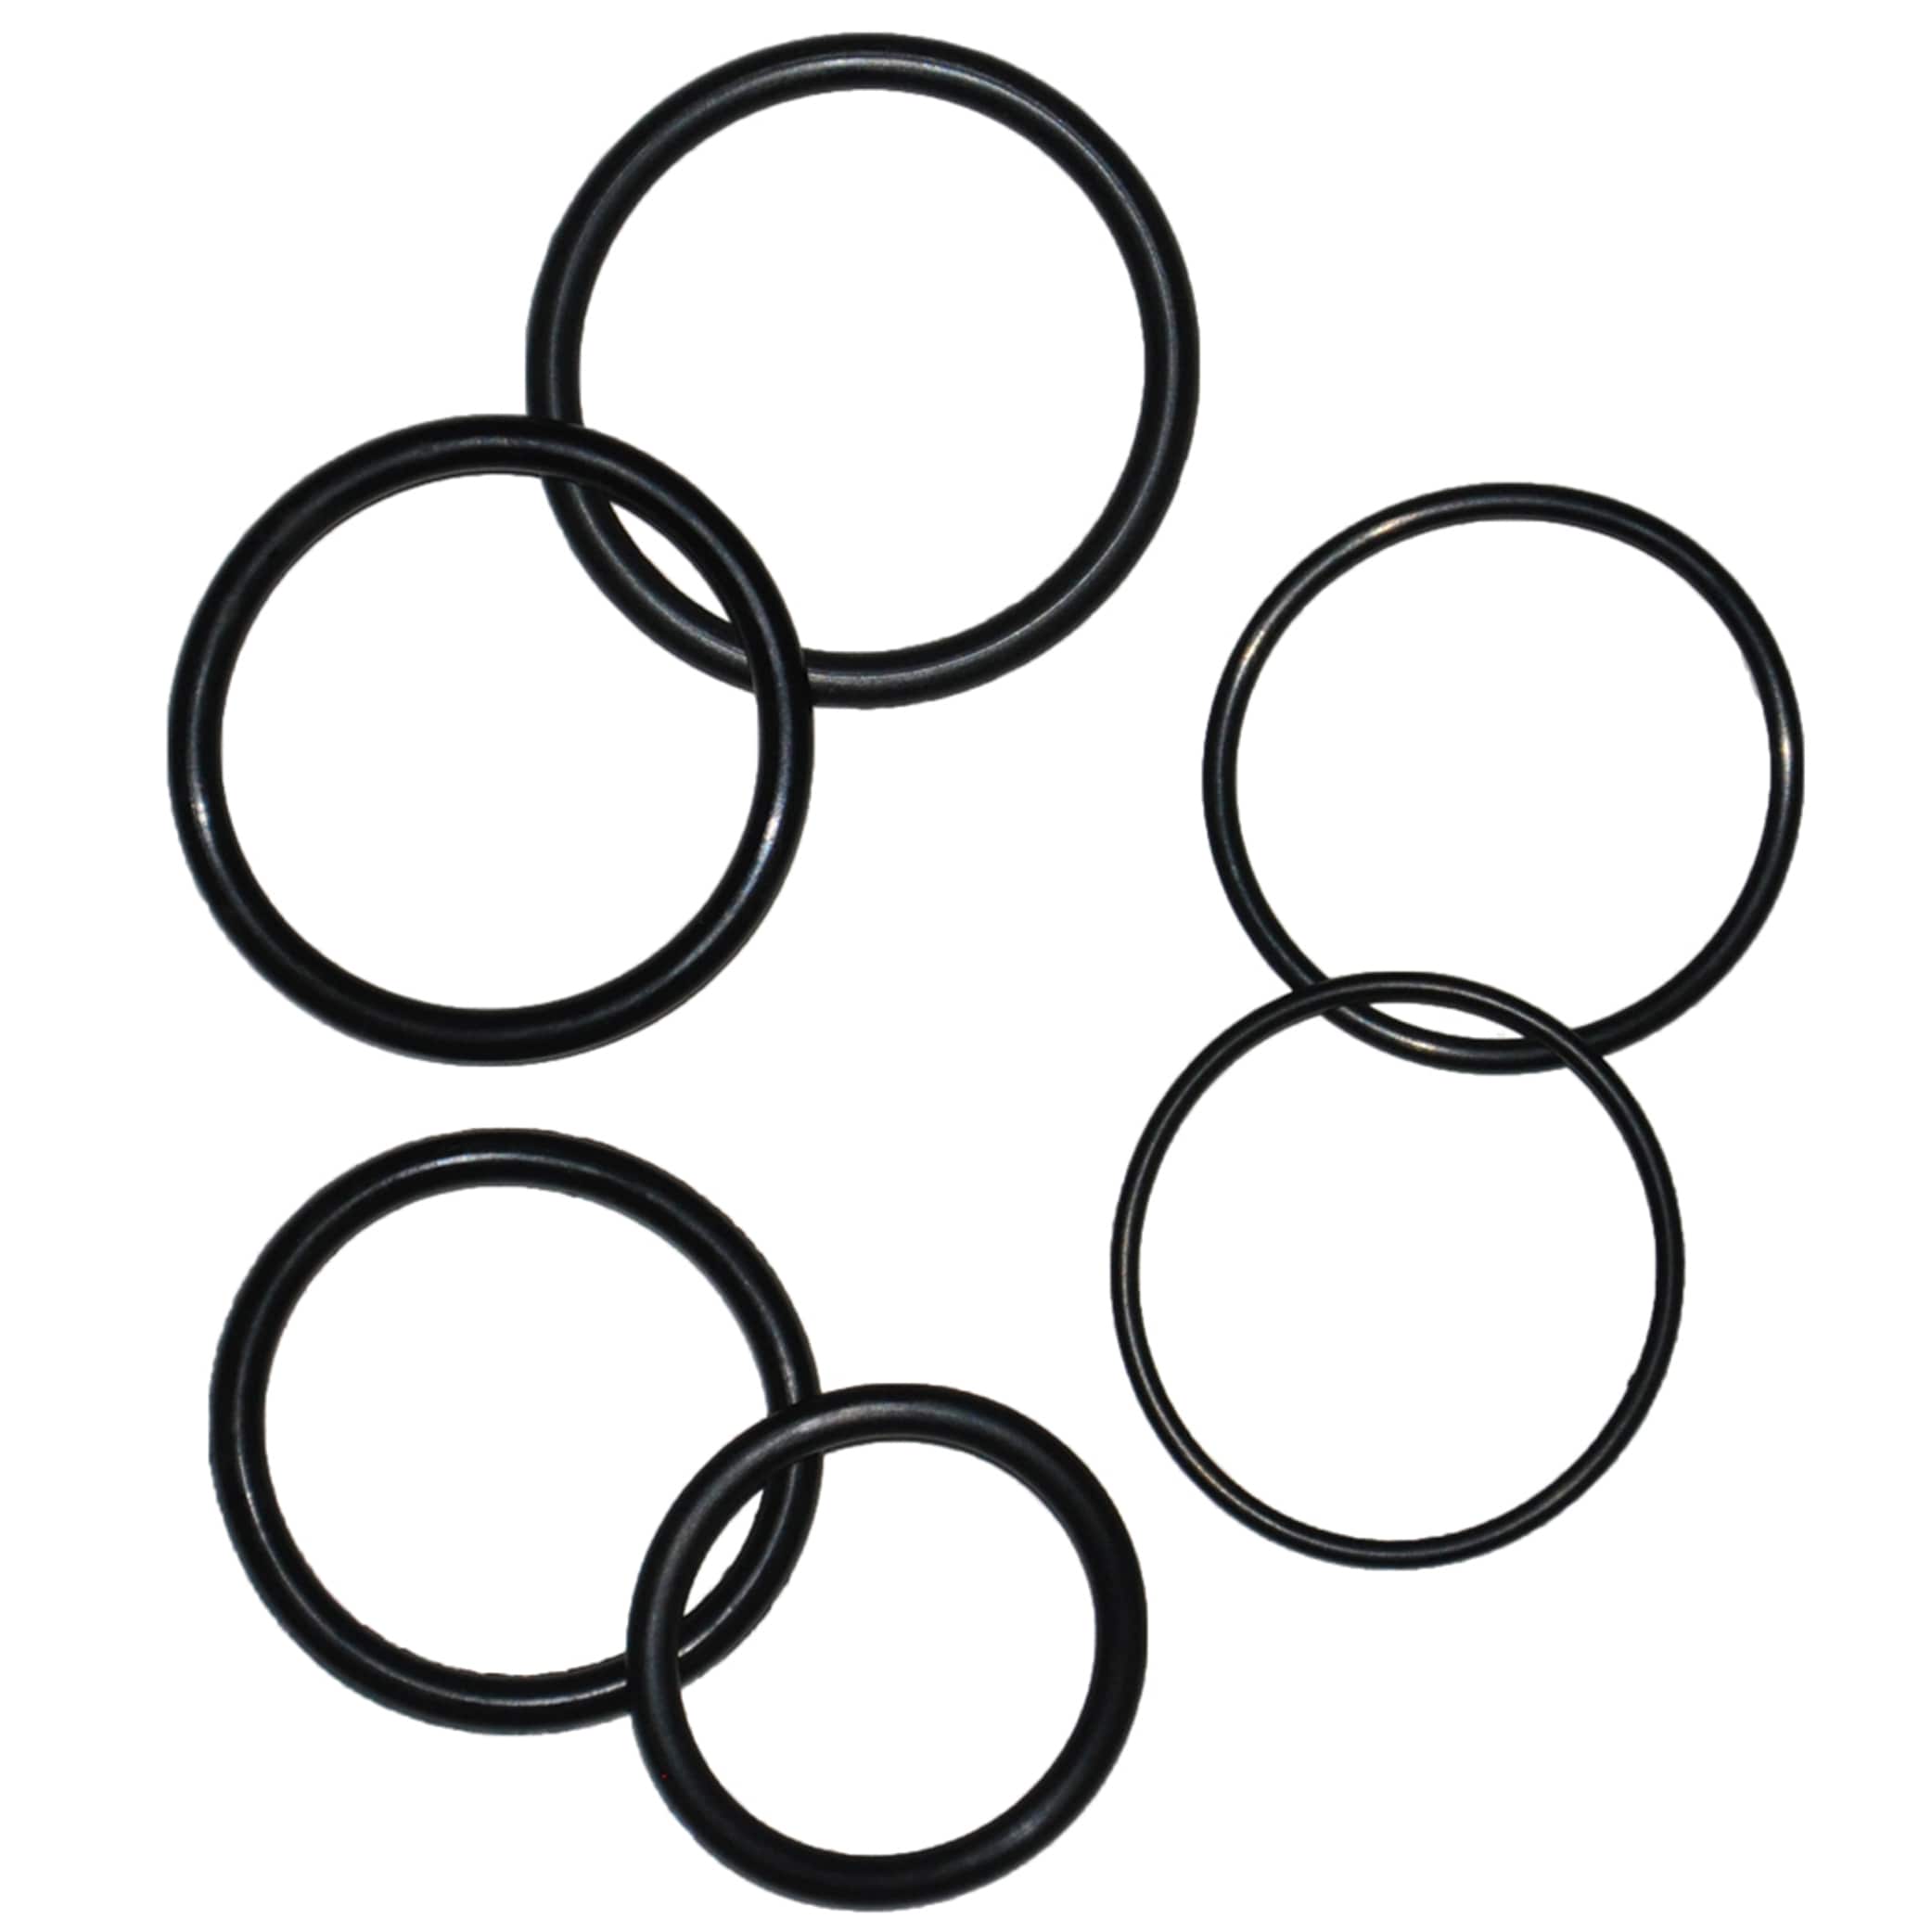 Rubber Decorating Ring Trim Adapter